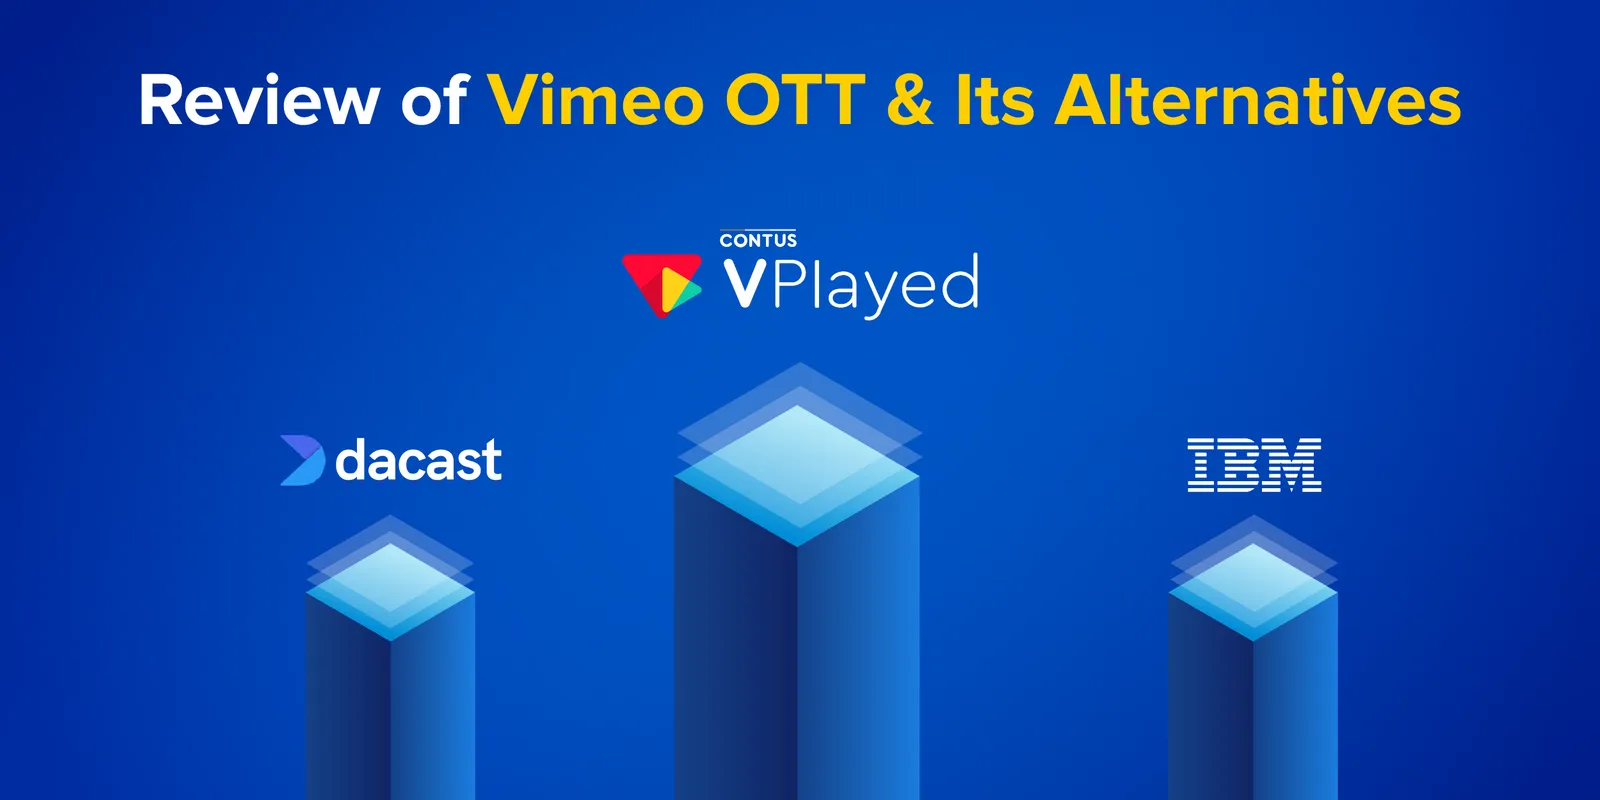 Vimeo OTT Review in 2022: Pros, Cons, Pricing, and Alternatives